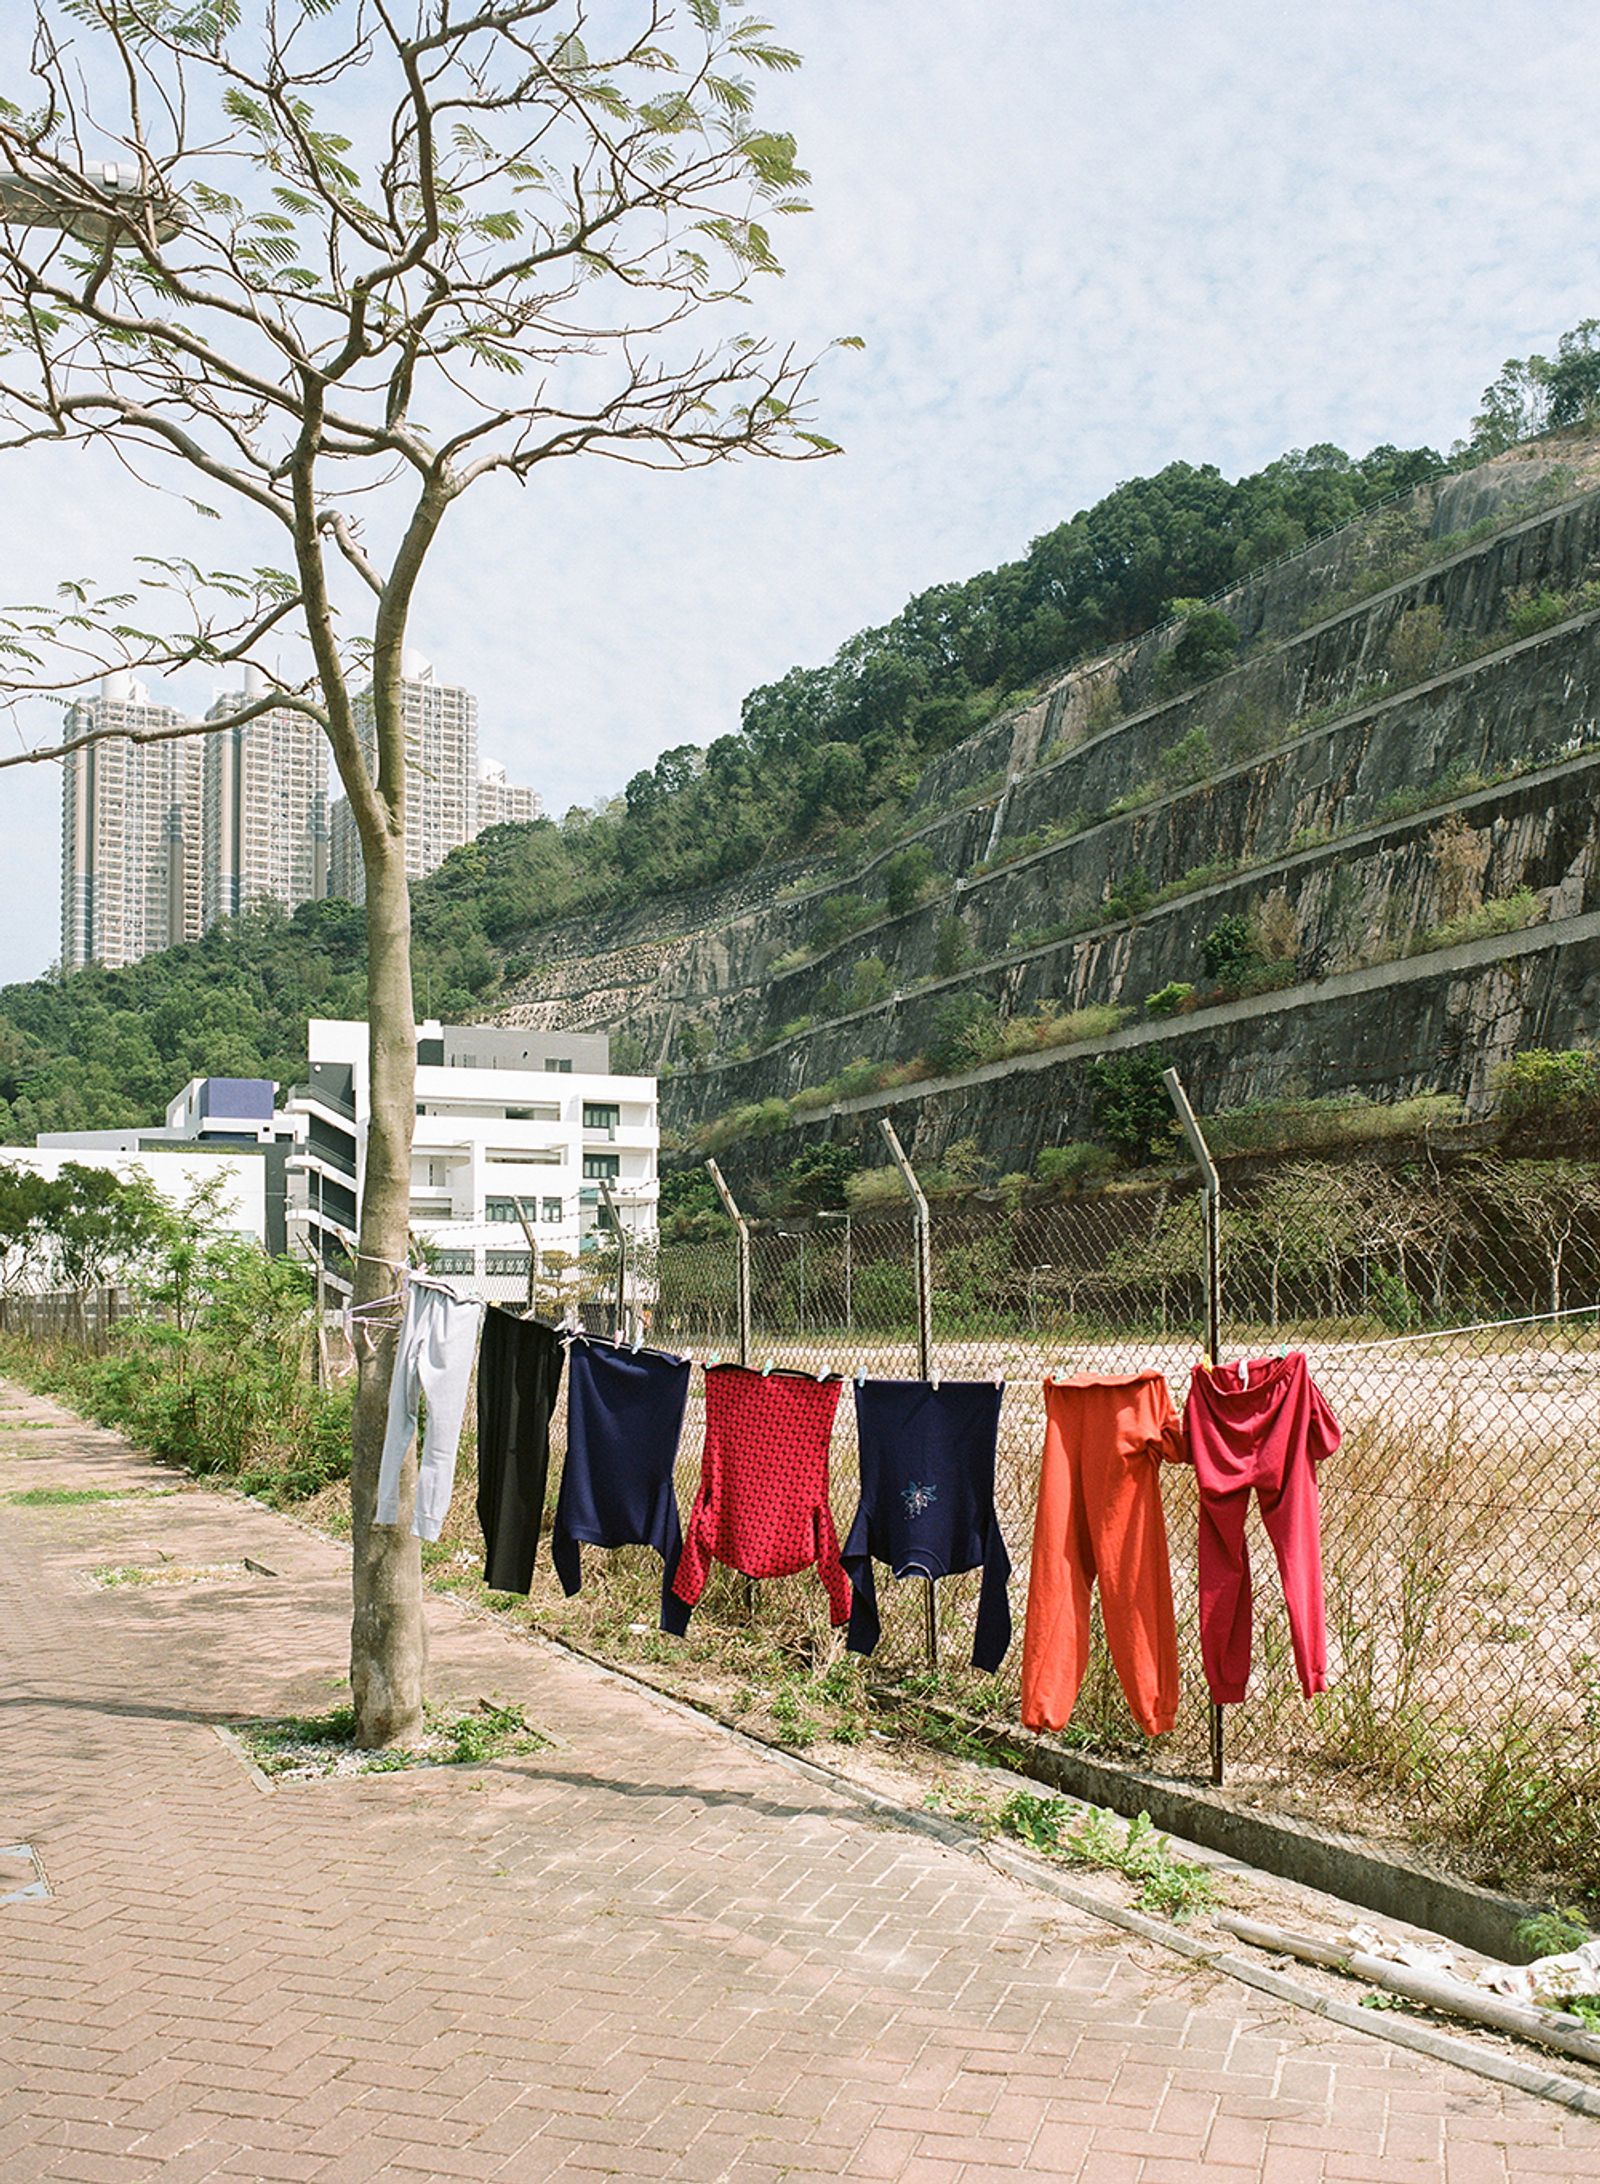 © Jimmi Wing Ka Ho - Image from the Laundry Art photography project